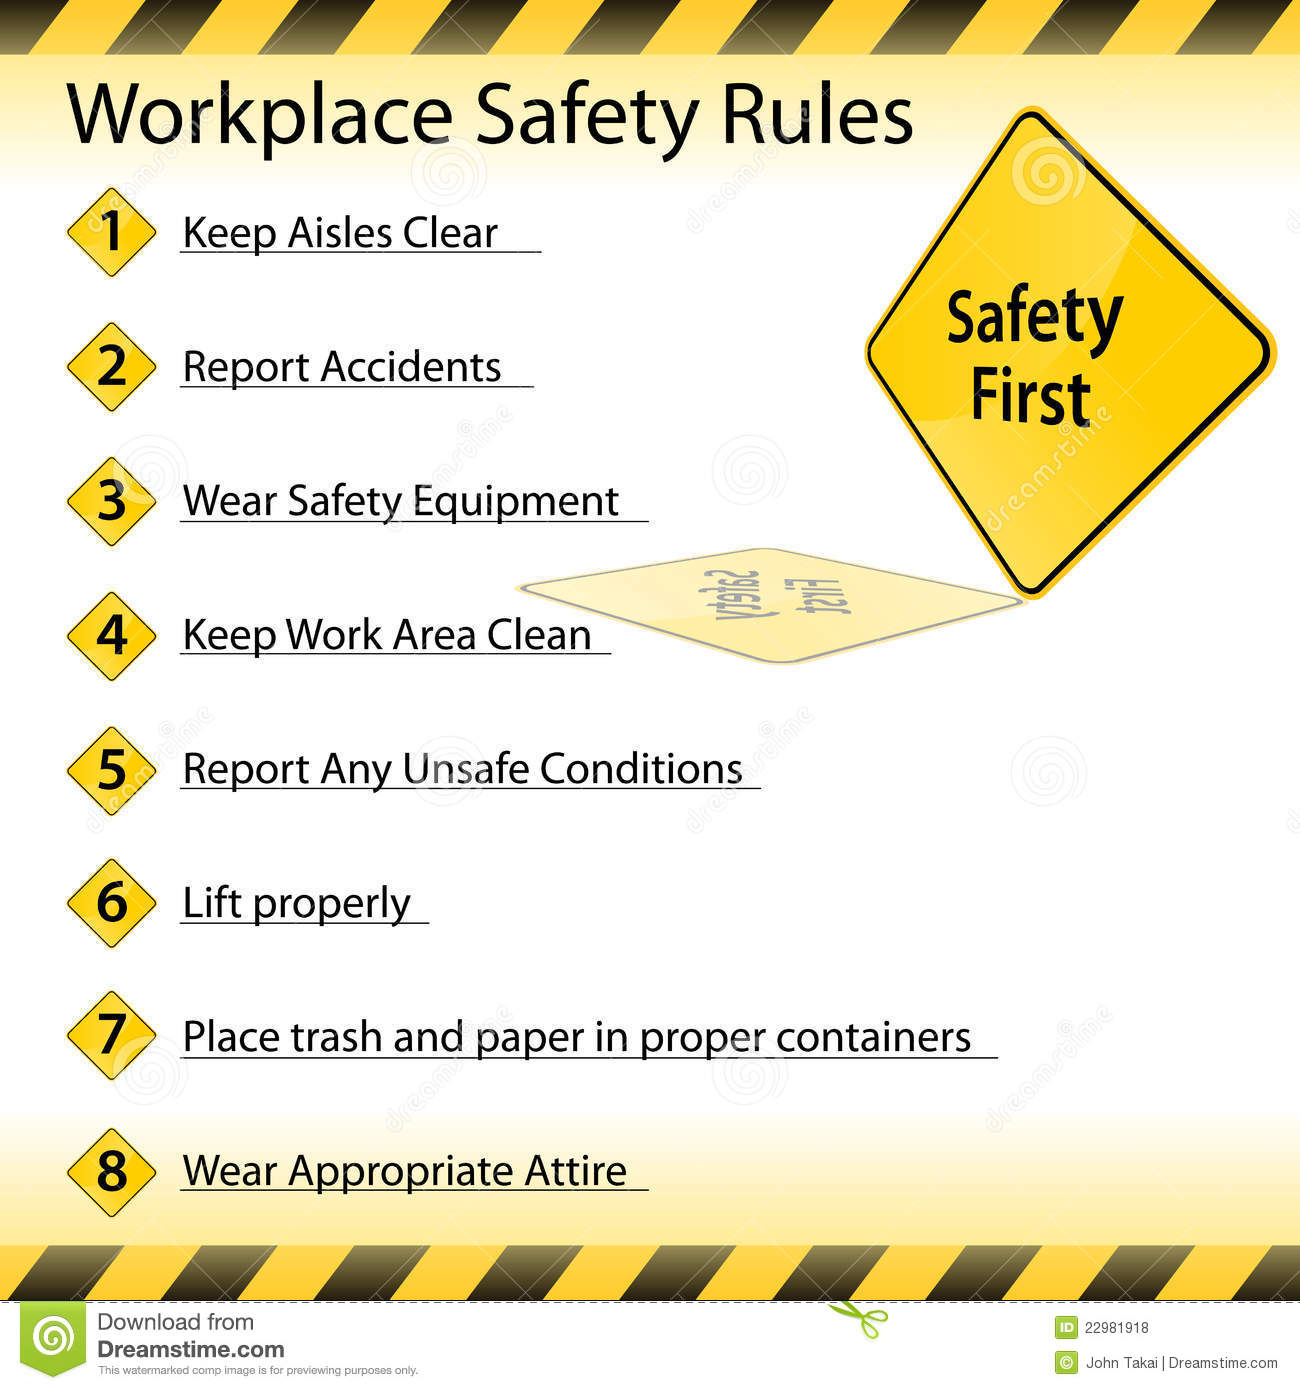 Workplace Safety Rules Royalty Free Stock Photos   Image  22981918